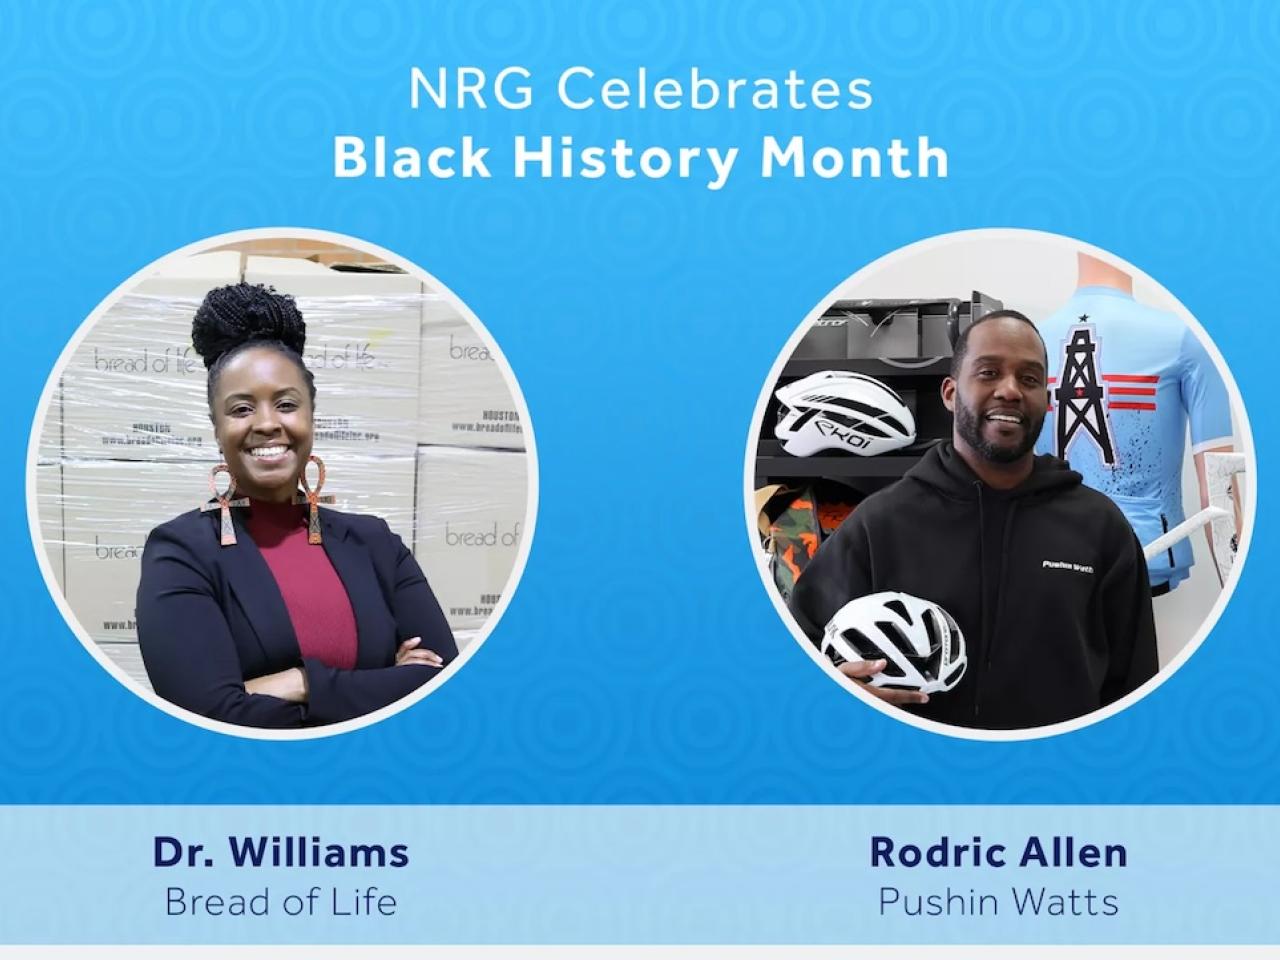 NRG Celebrates Black History Month. Dr. Williams from Bread of Life and Rodric Allen from Pushin Watts shown.